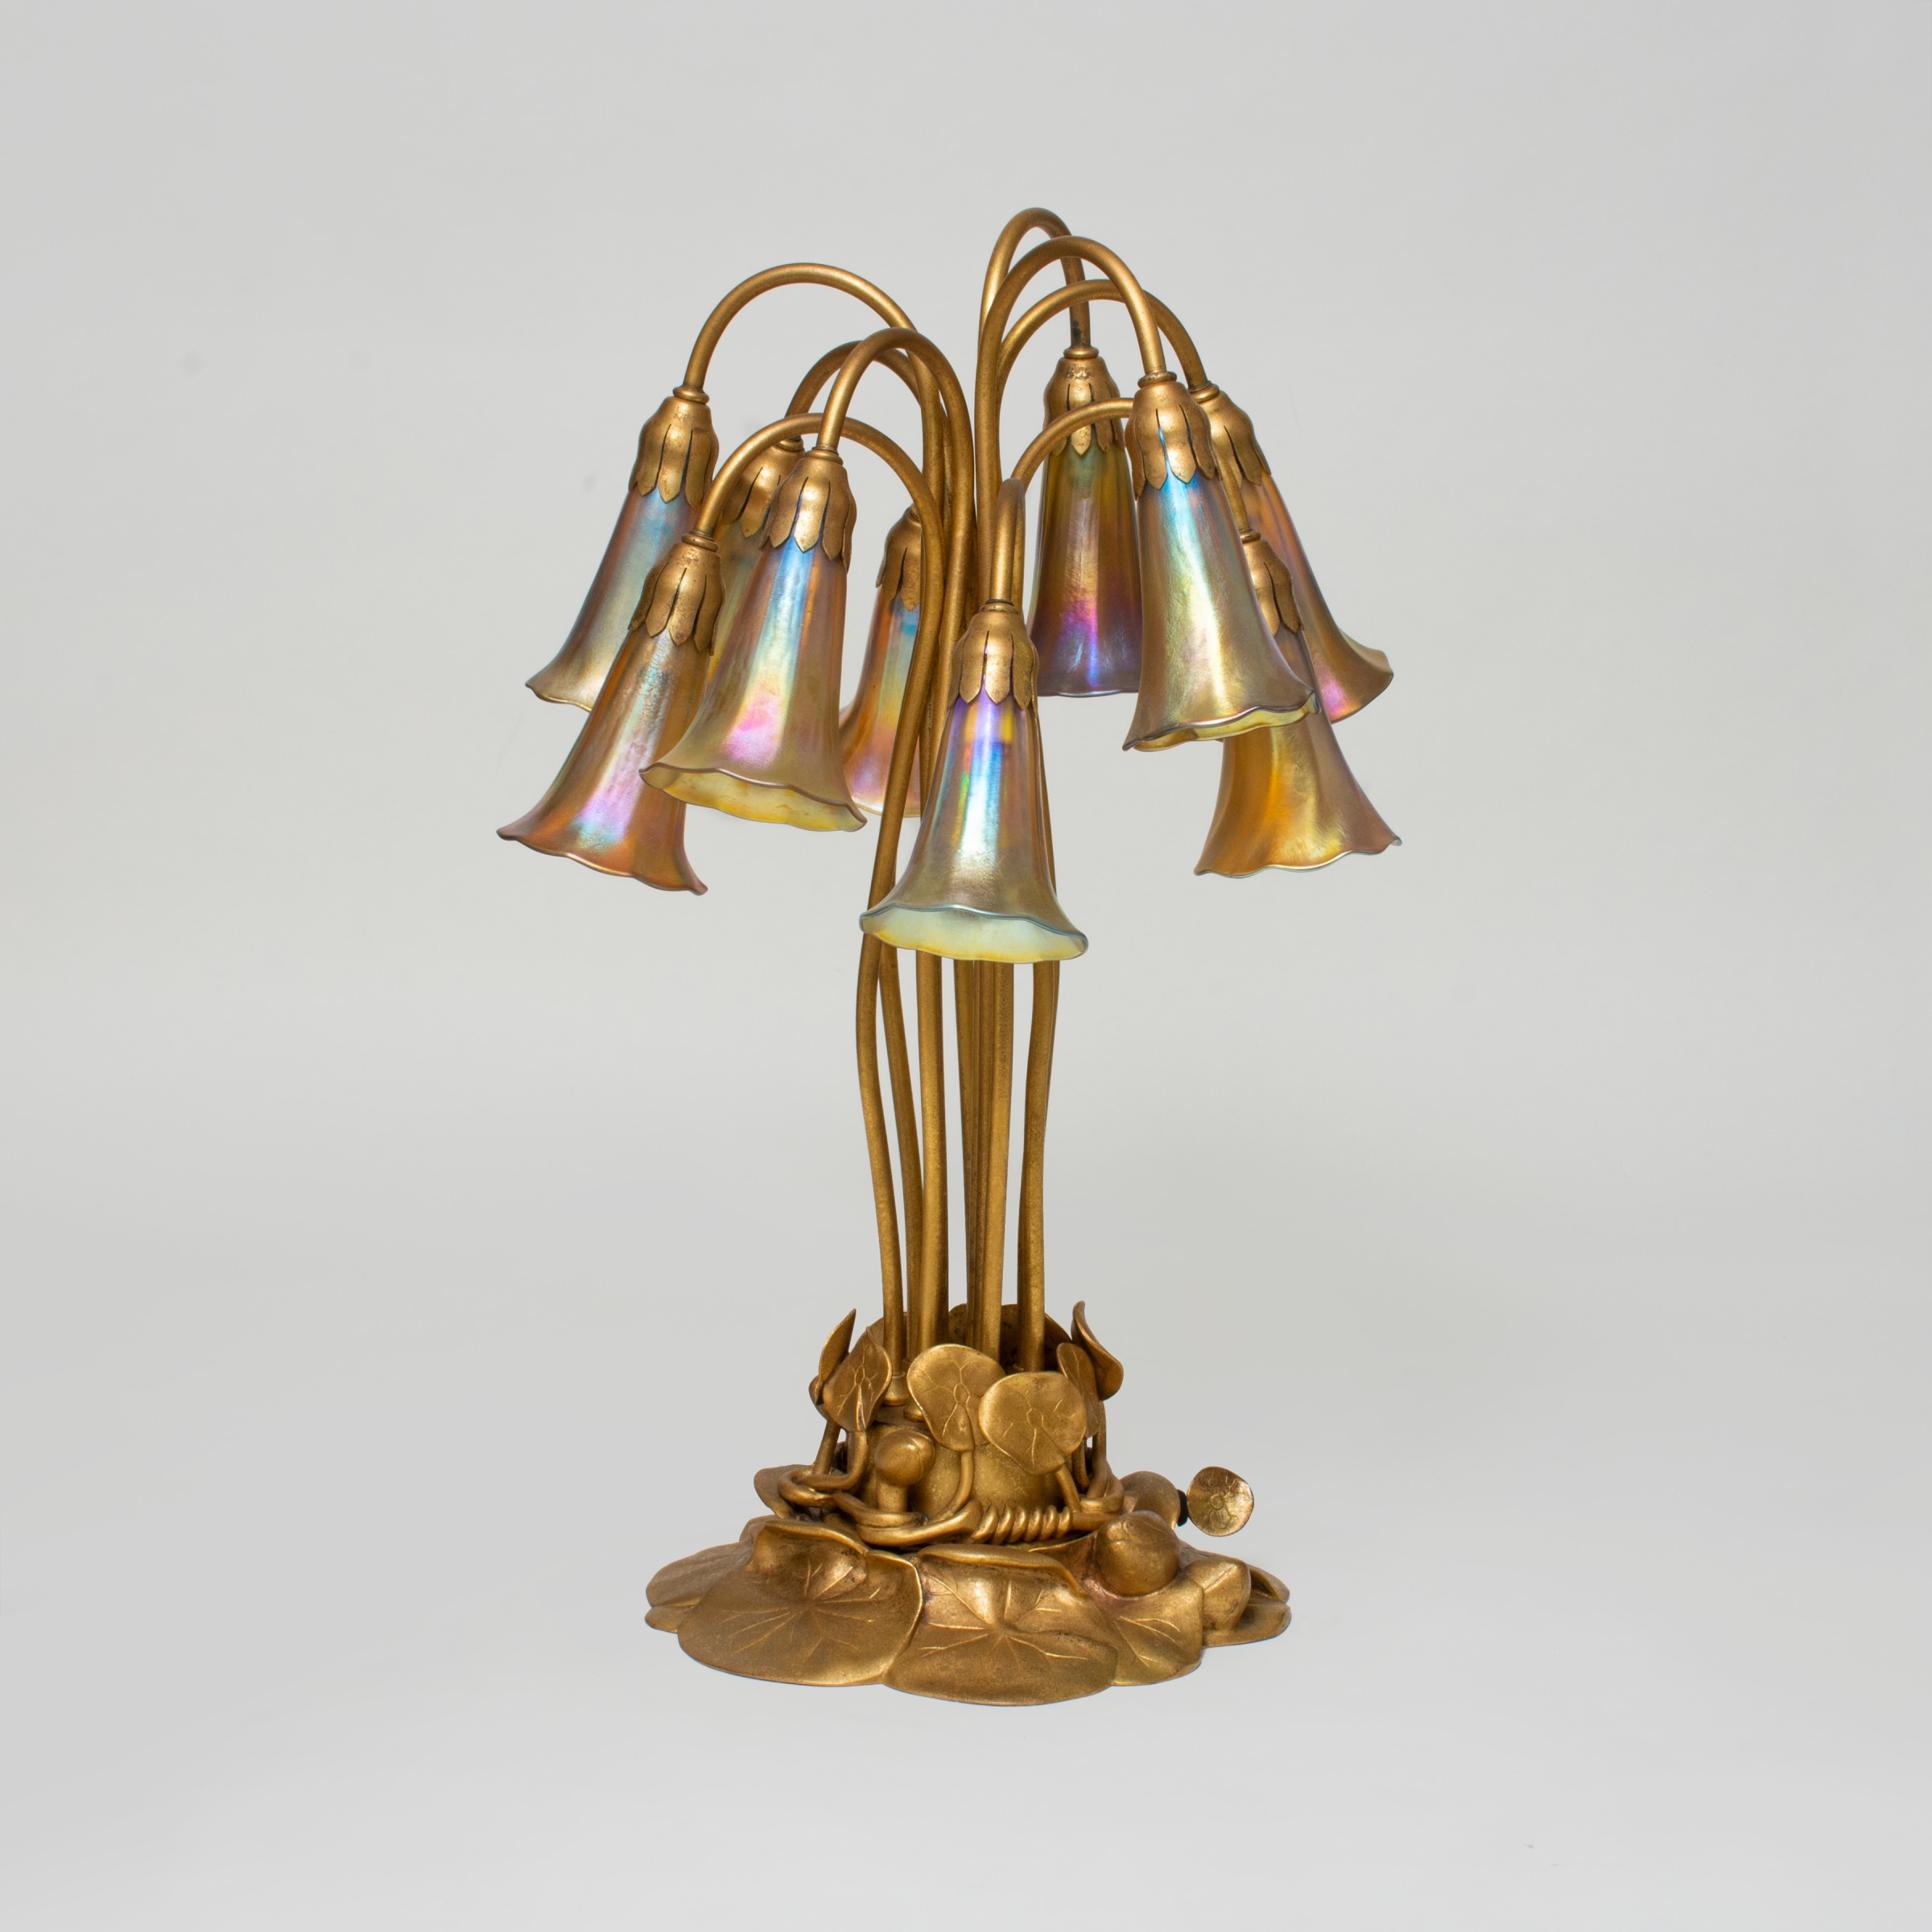 tiffany studios 10 light lily lamp unlit, the bright gold of the base and the gold iridescent tiffany glass shades is showing clearly.